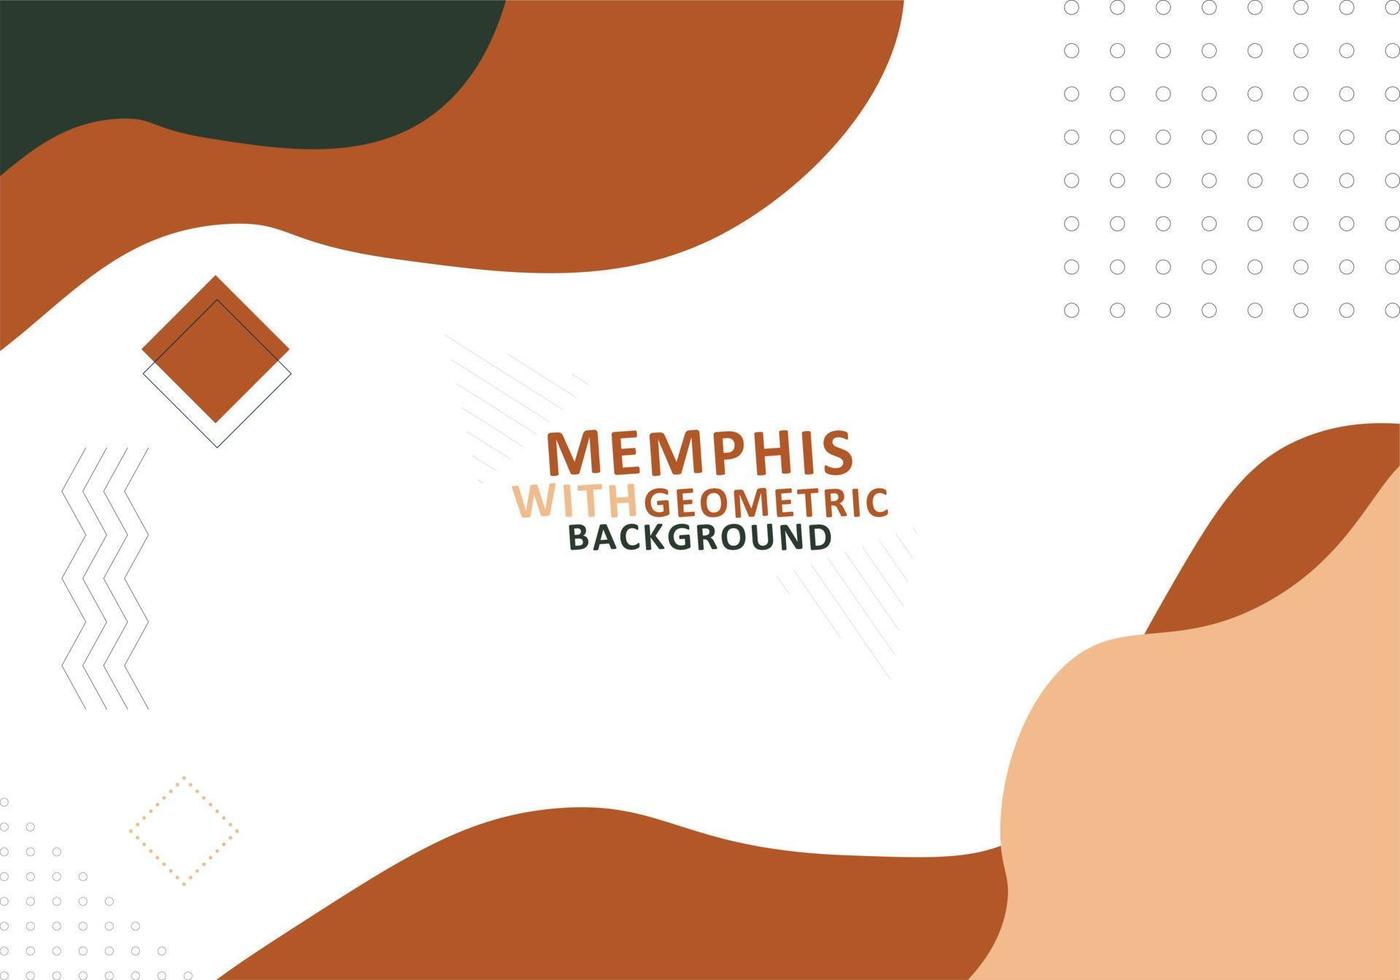 abstract memphis background with geometric shapes vector